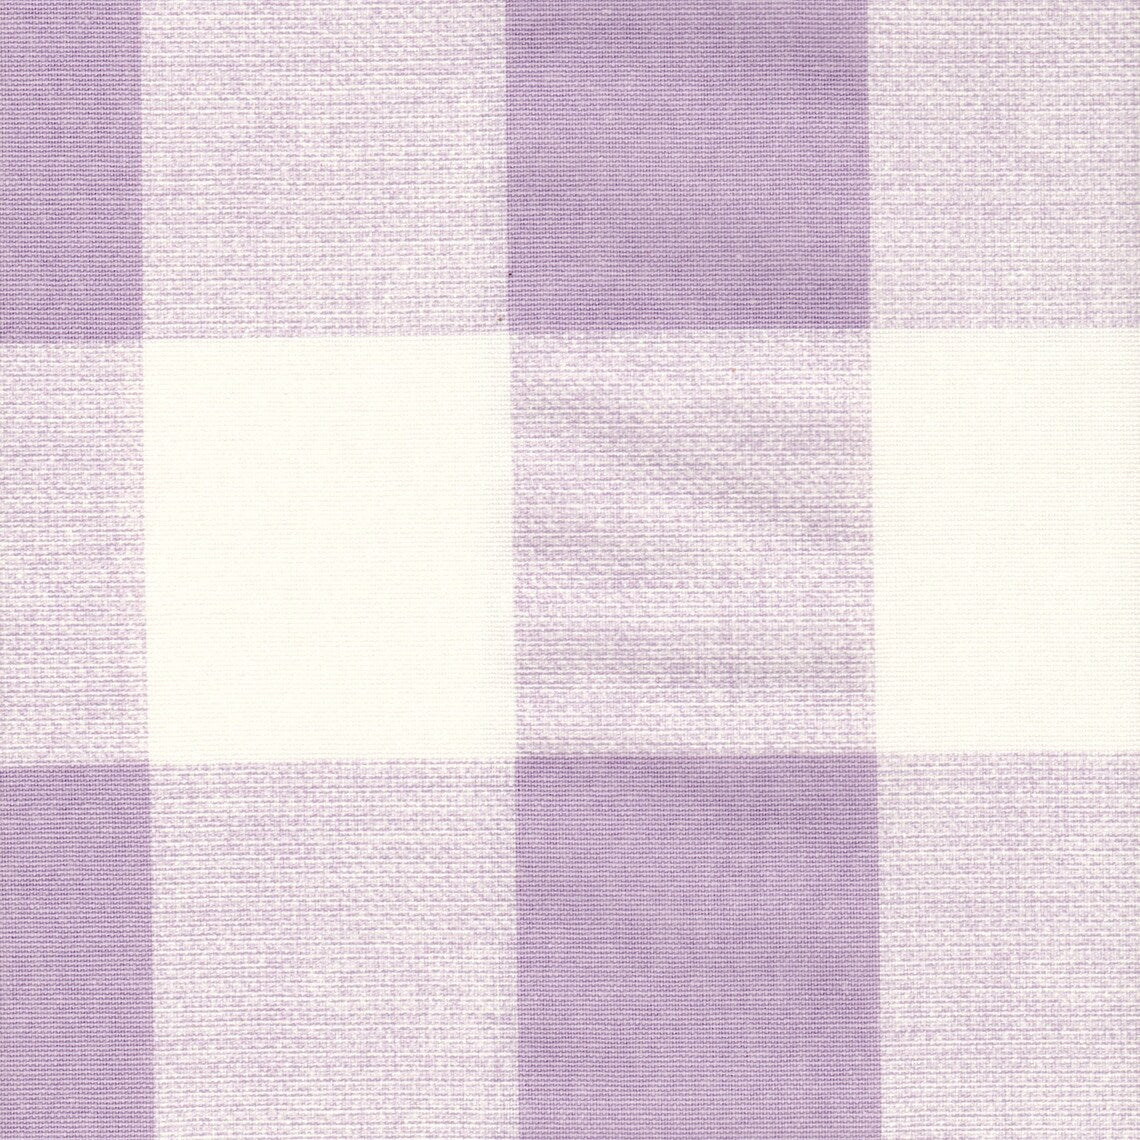 Duvet Cover in Anderson Orchid Lavender Buffalo Check Plaid